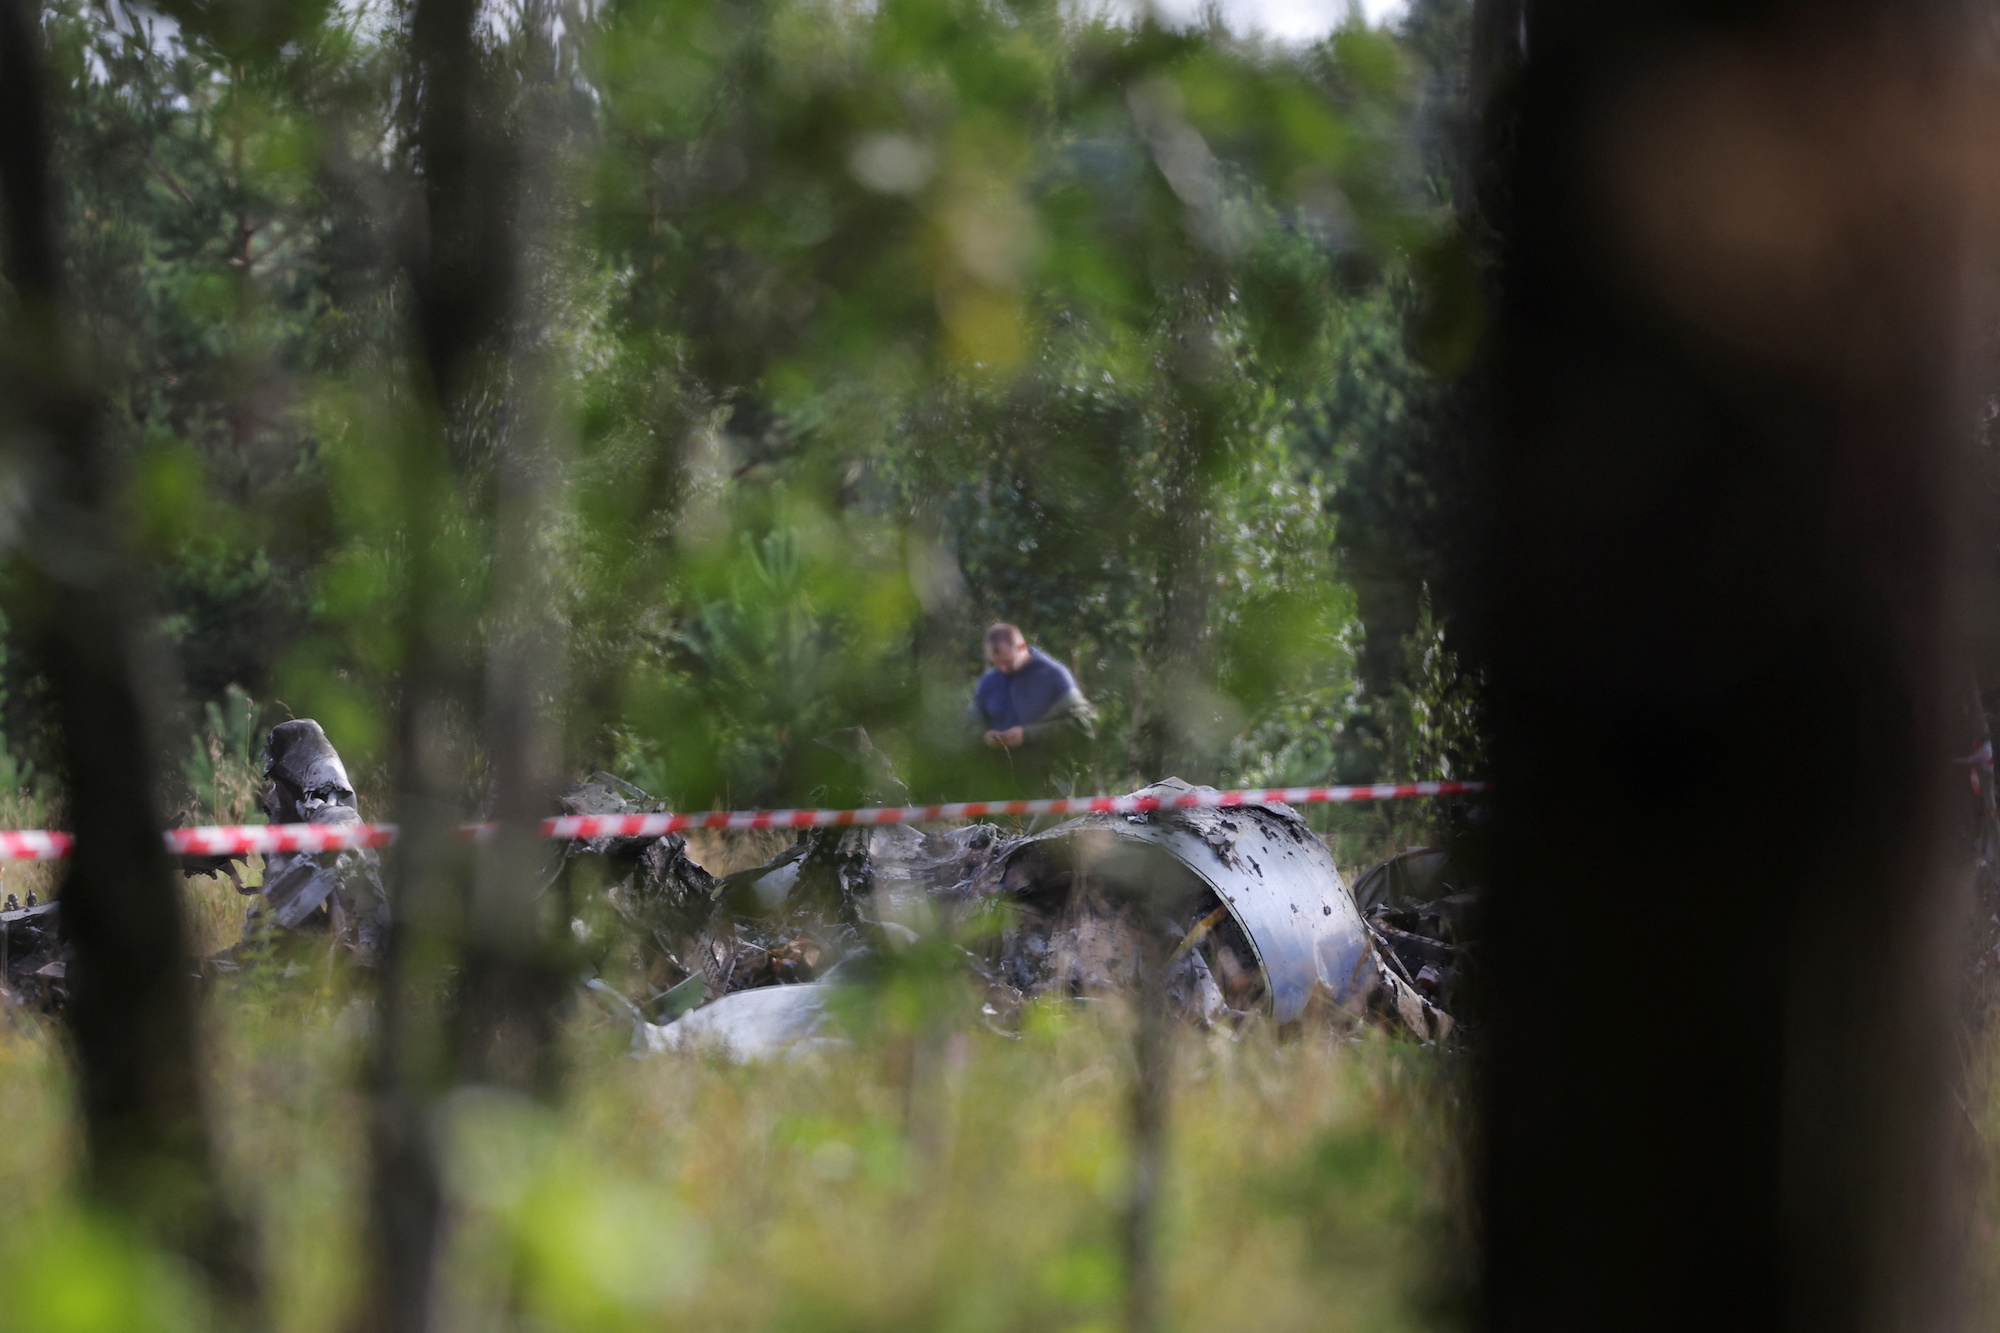 A specialist works at the site of a crash of the private jet linked to Yevgeny Prigozhin in the Tver region, Russia, on August 24.